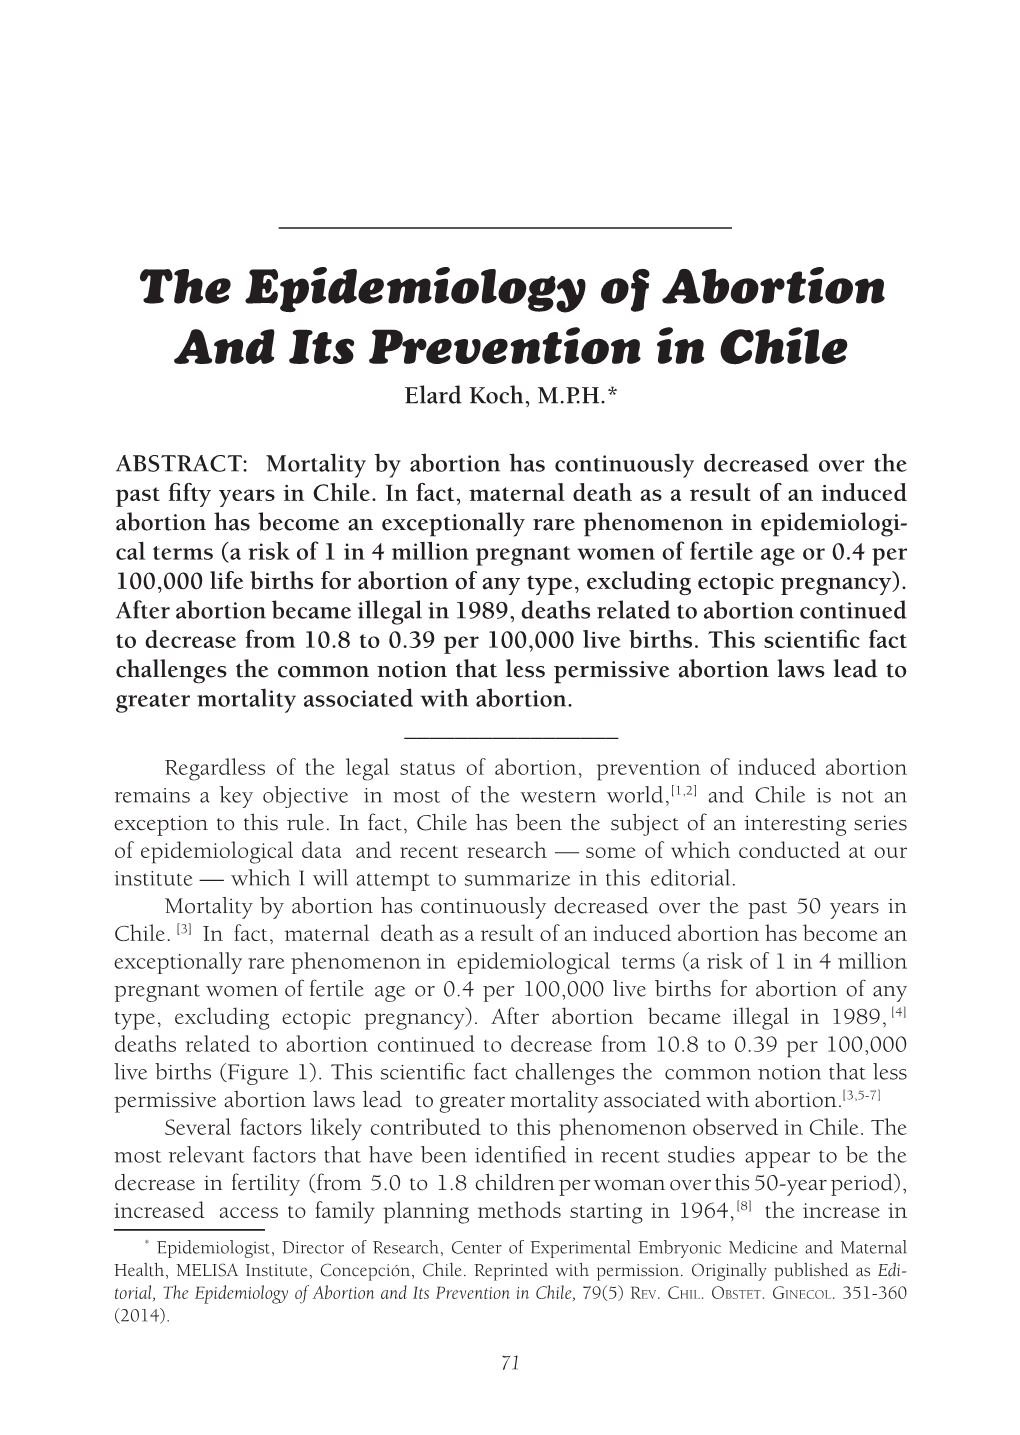 The Epidemiology of Abortion and Its Prevention in Chile, 79(5) Rev